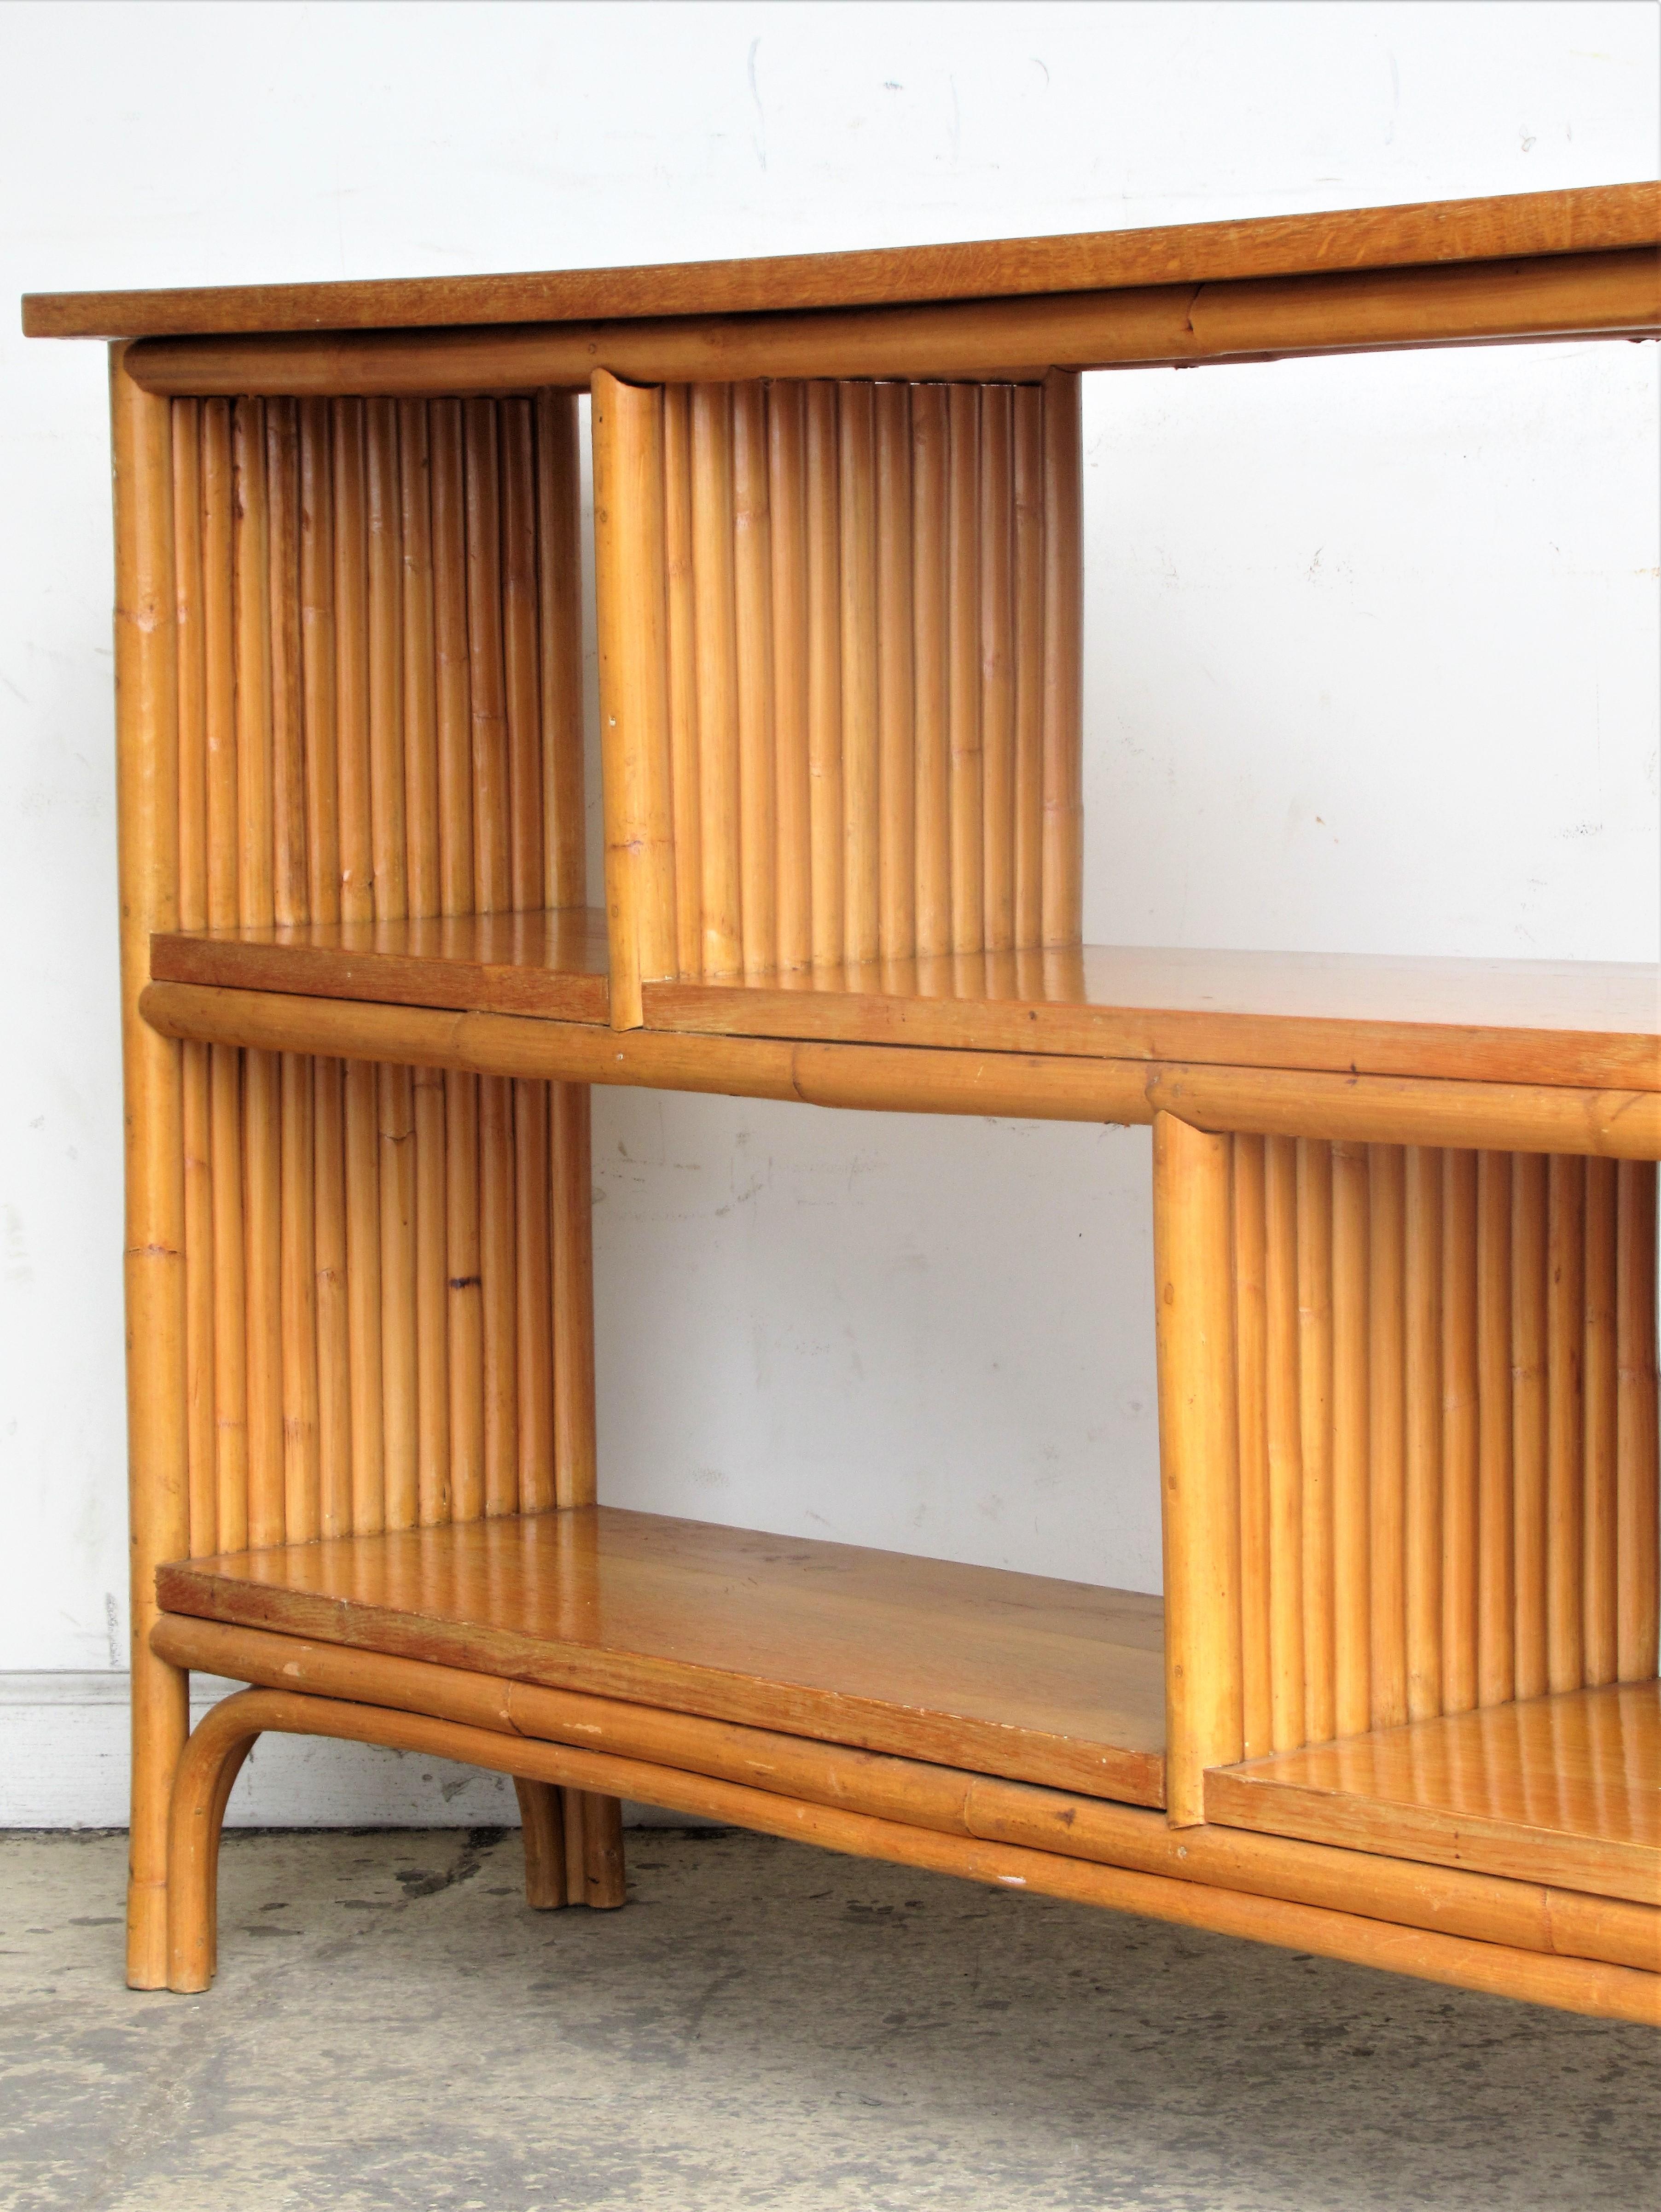 A divided four section rectangular rattan and quarter sawn oak bookcase in beautifully aged original glowing surface color. A hard to find modernist piece of rattan  furniture with exceptionally fine quality construction. Paul Frankl design, made in